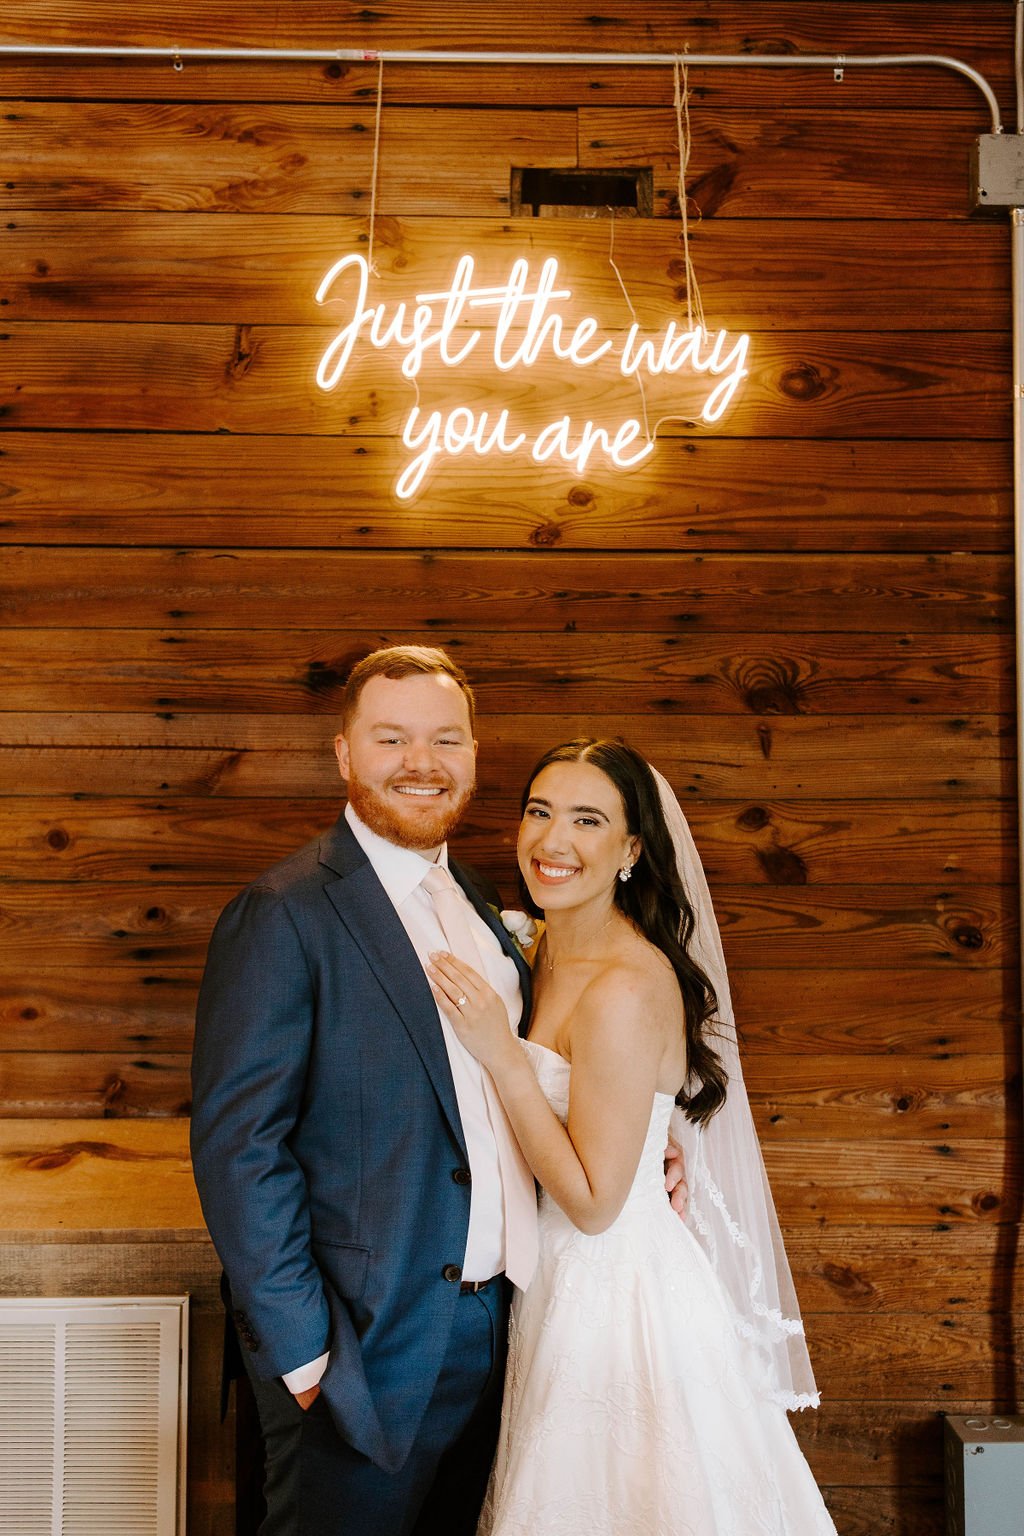 Bride and groom smiling in front of sign that read "Just the way you are"